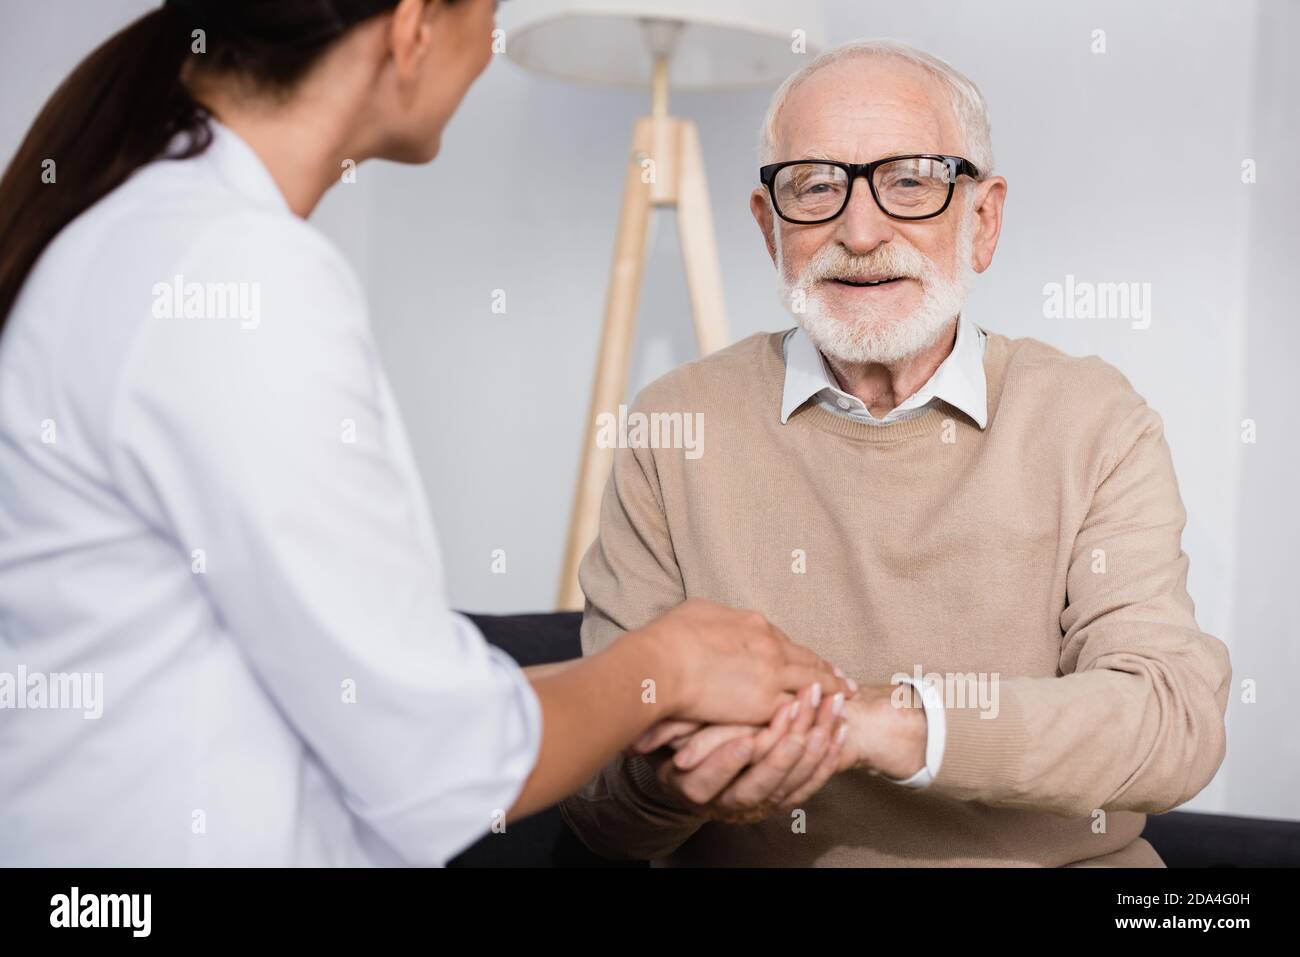 elderly man looking at camera while holding hands with social worker at home on blurred foreground Stock Photo